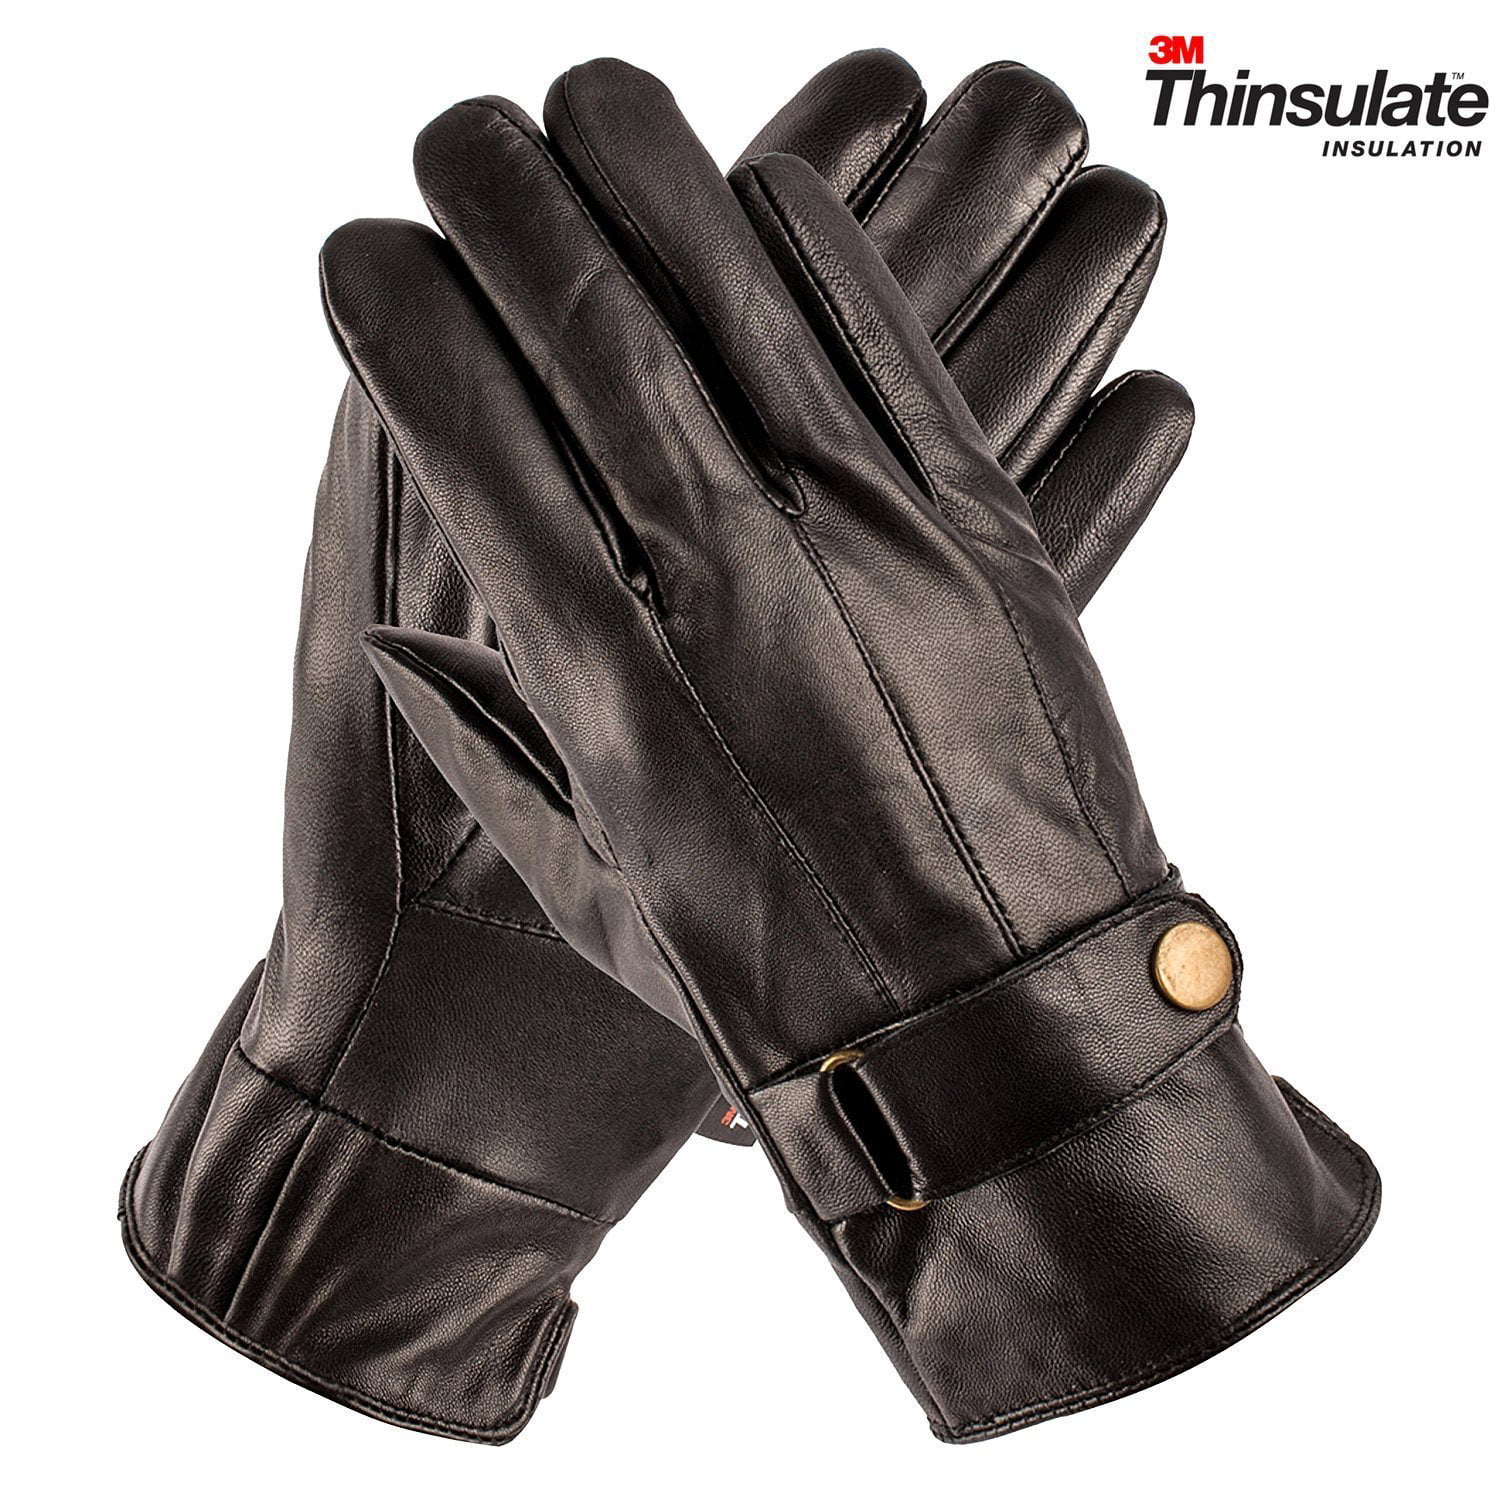 Pierre Cardin Mens Leather Gloves Luxury Driving Gloves Perfect as Winter Gloves